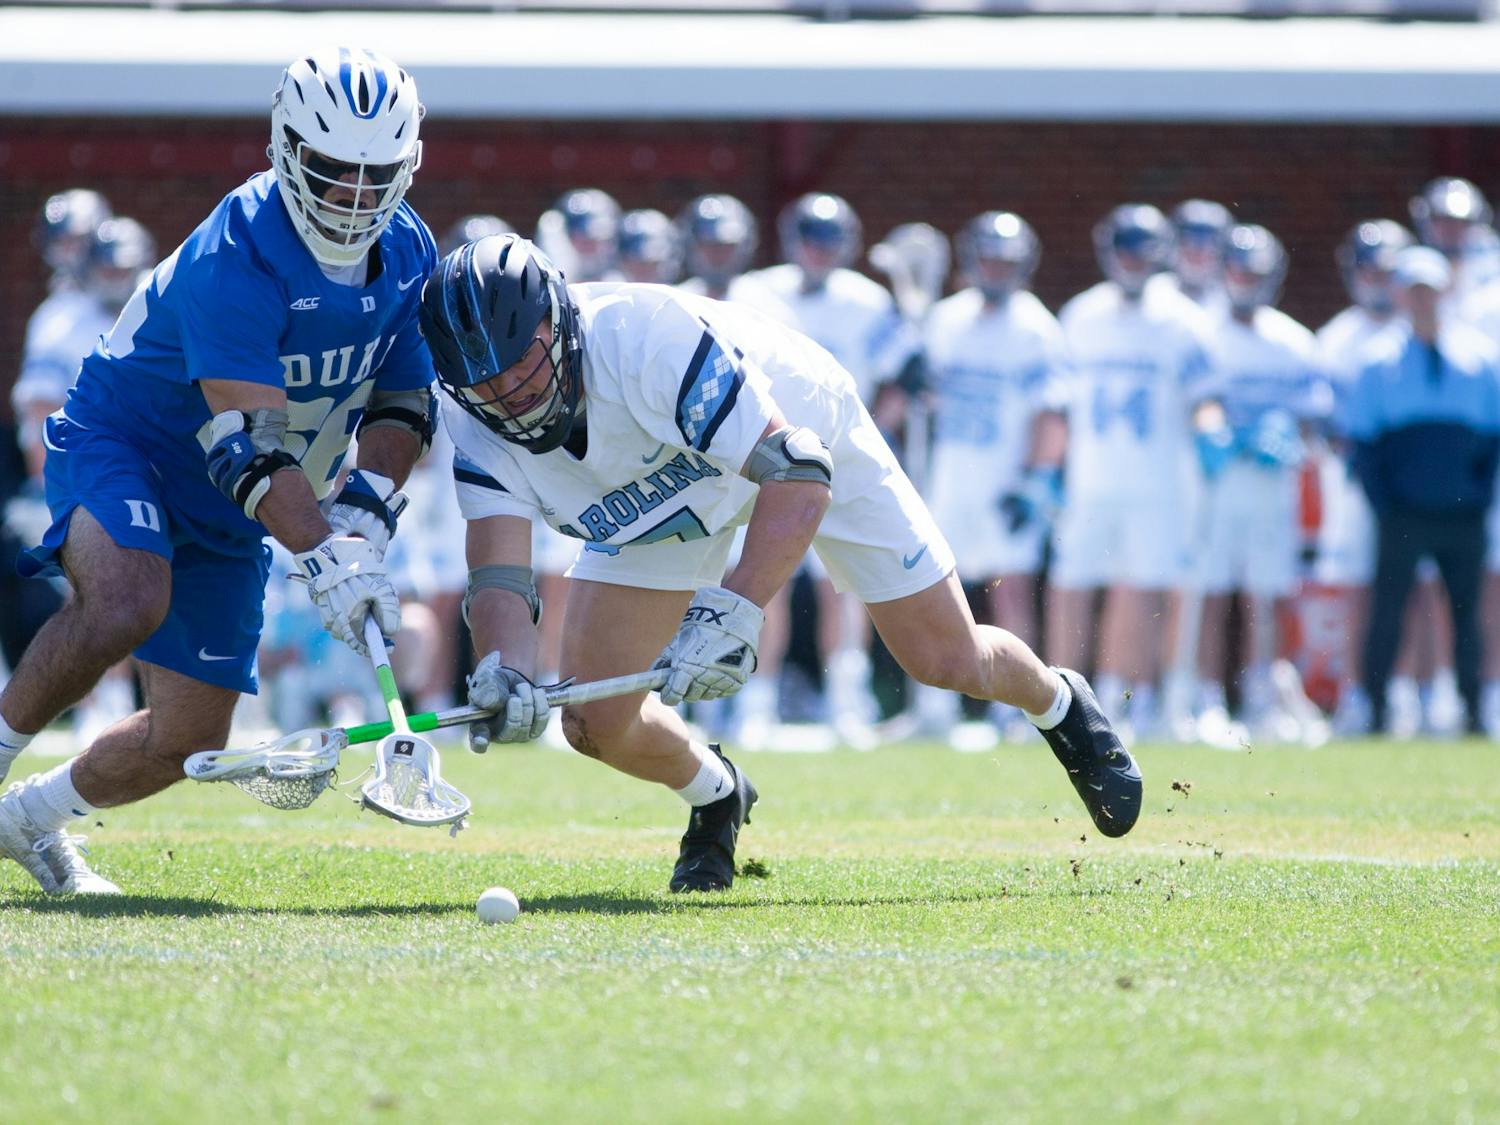 UNC senior midfielder Zac Tucci (7) fights for the ball during a home game against Duke at Dorrance Field on Saturday Apr. 2, 2022.